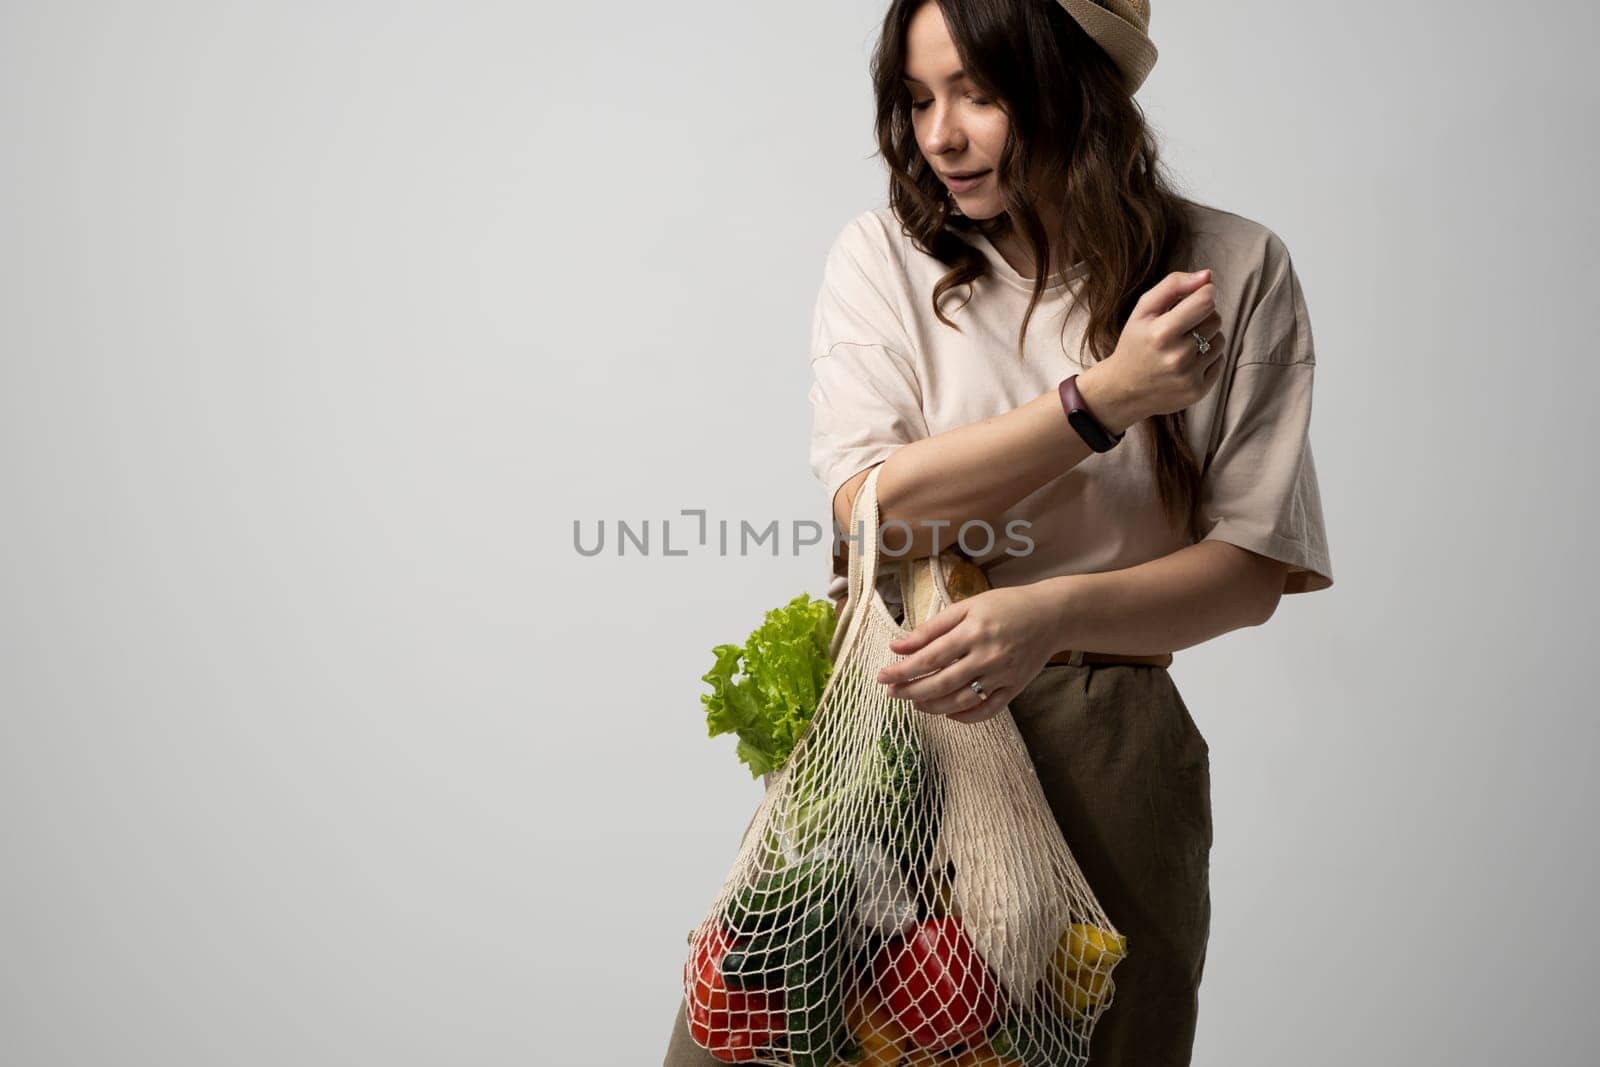 Brunette women in dress holds mesh bag with vegetables, fruits and groceries. Concept of no plastic. Zero waste, plastic free. Eco friendly concept. Sustainable lifestyle. by vovsht